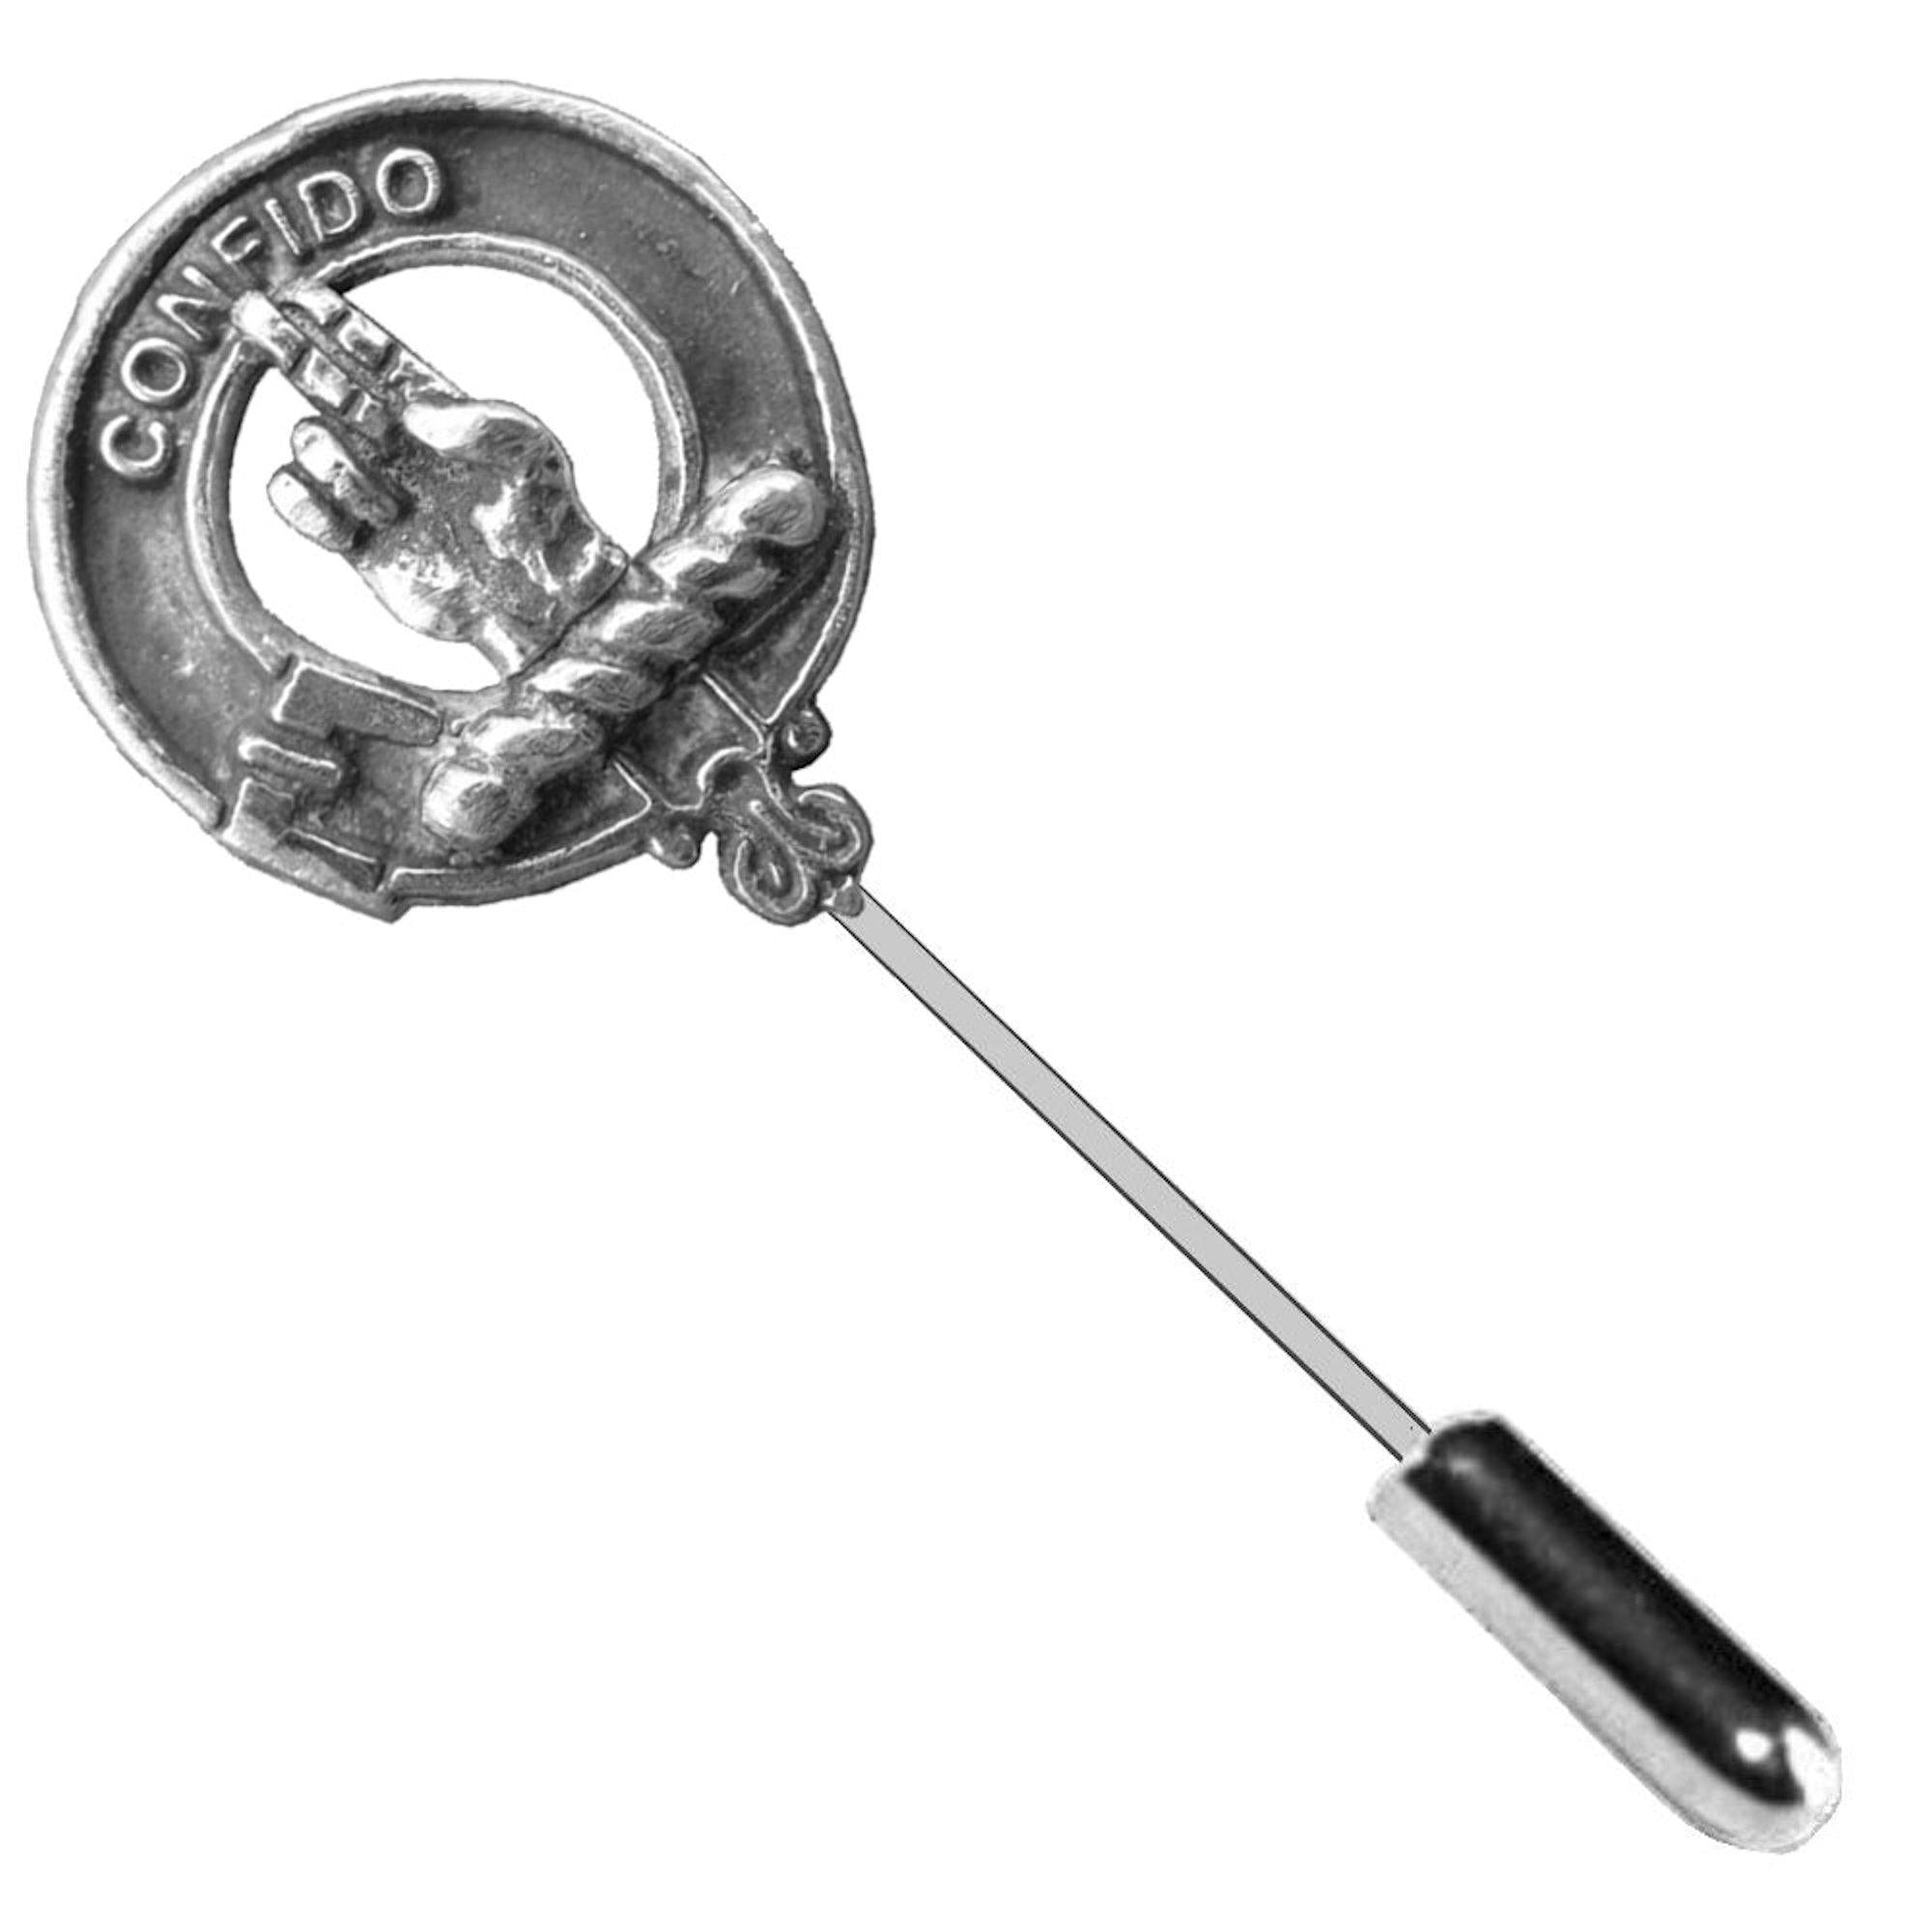 Boyd Clan Crest Stick or Cravat pin, Sterling Silver